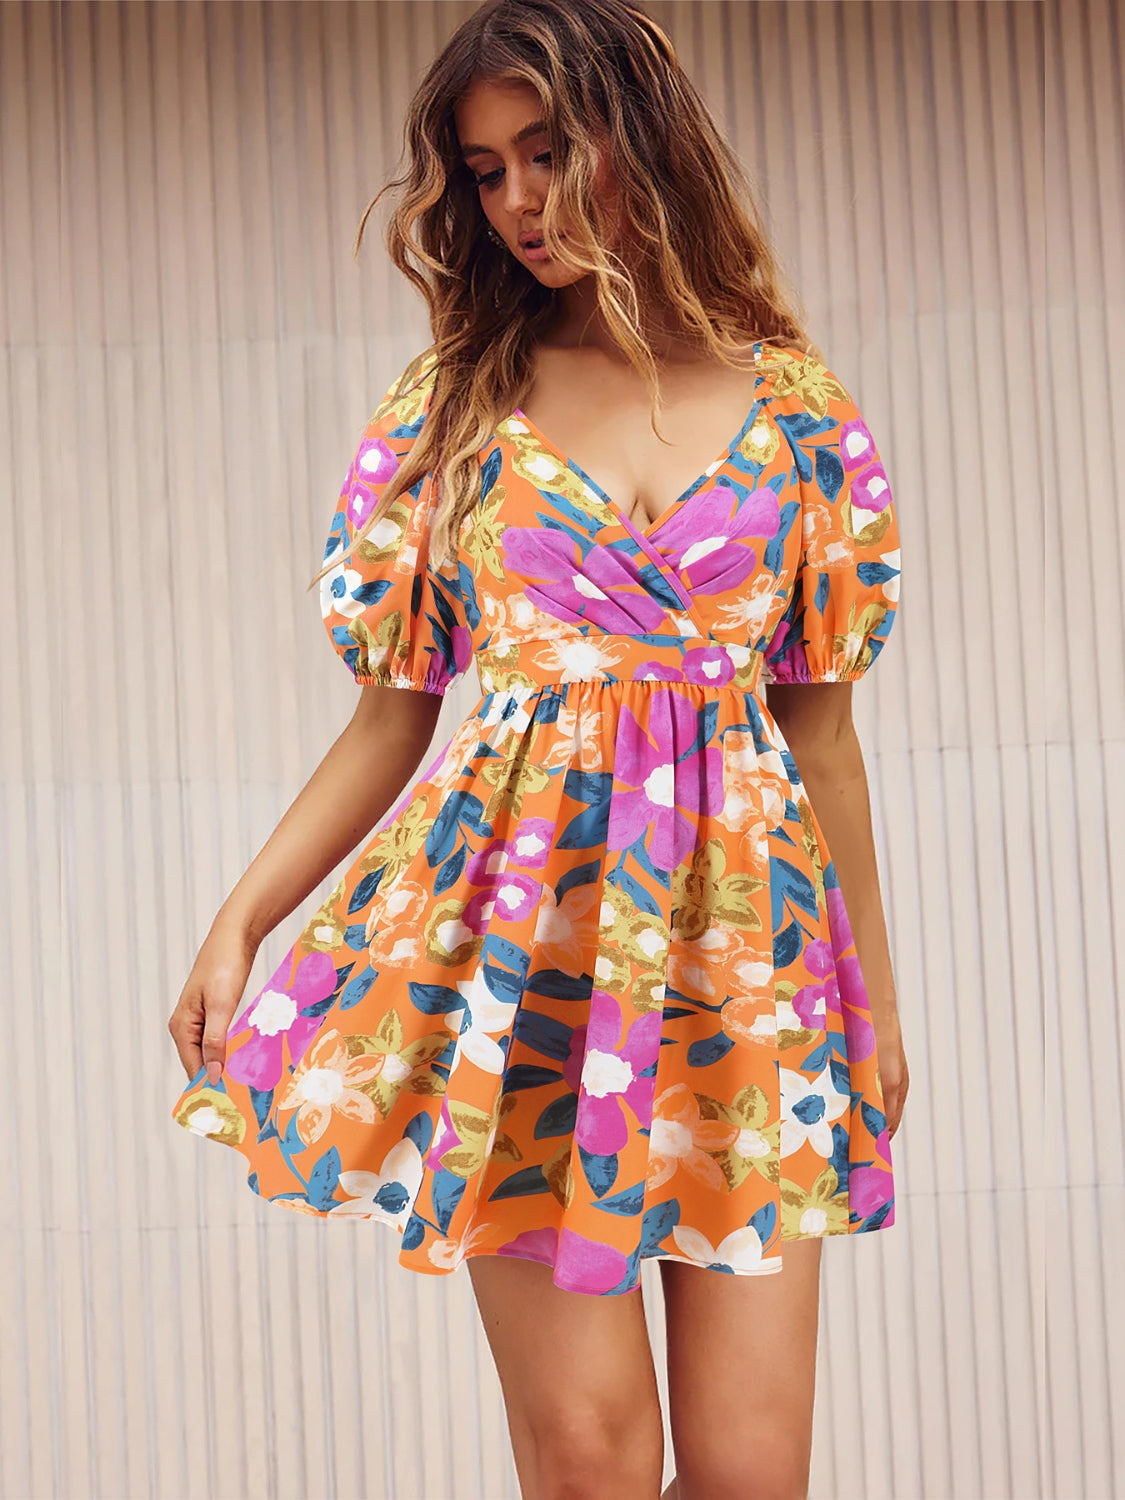 Woman wearing a vibrant floral summer surplice dress in tangerine, perfect for casual summer outings.